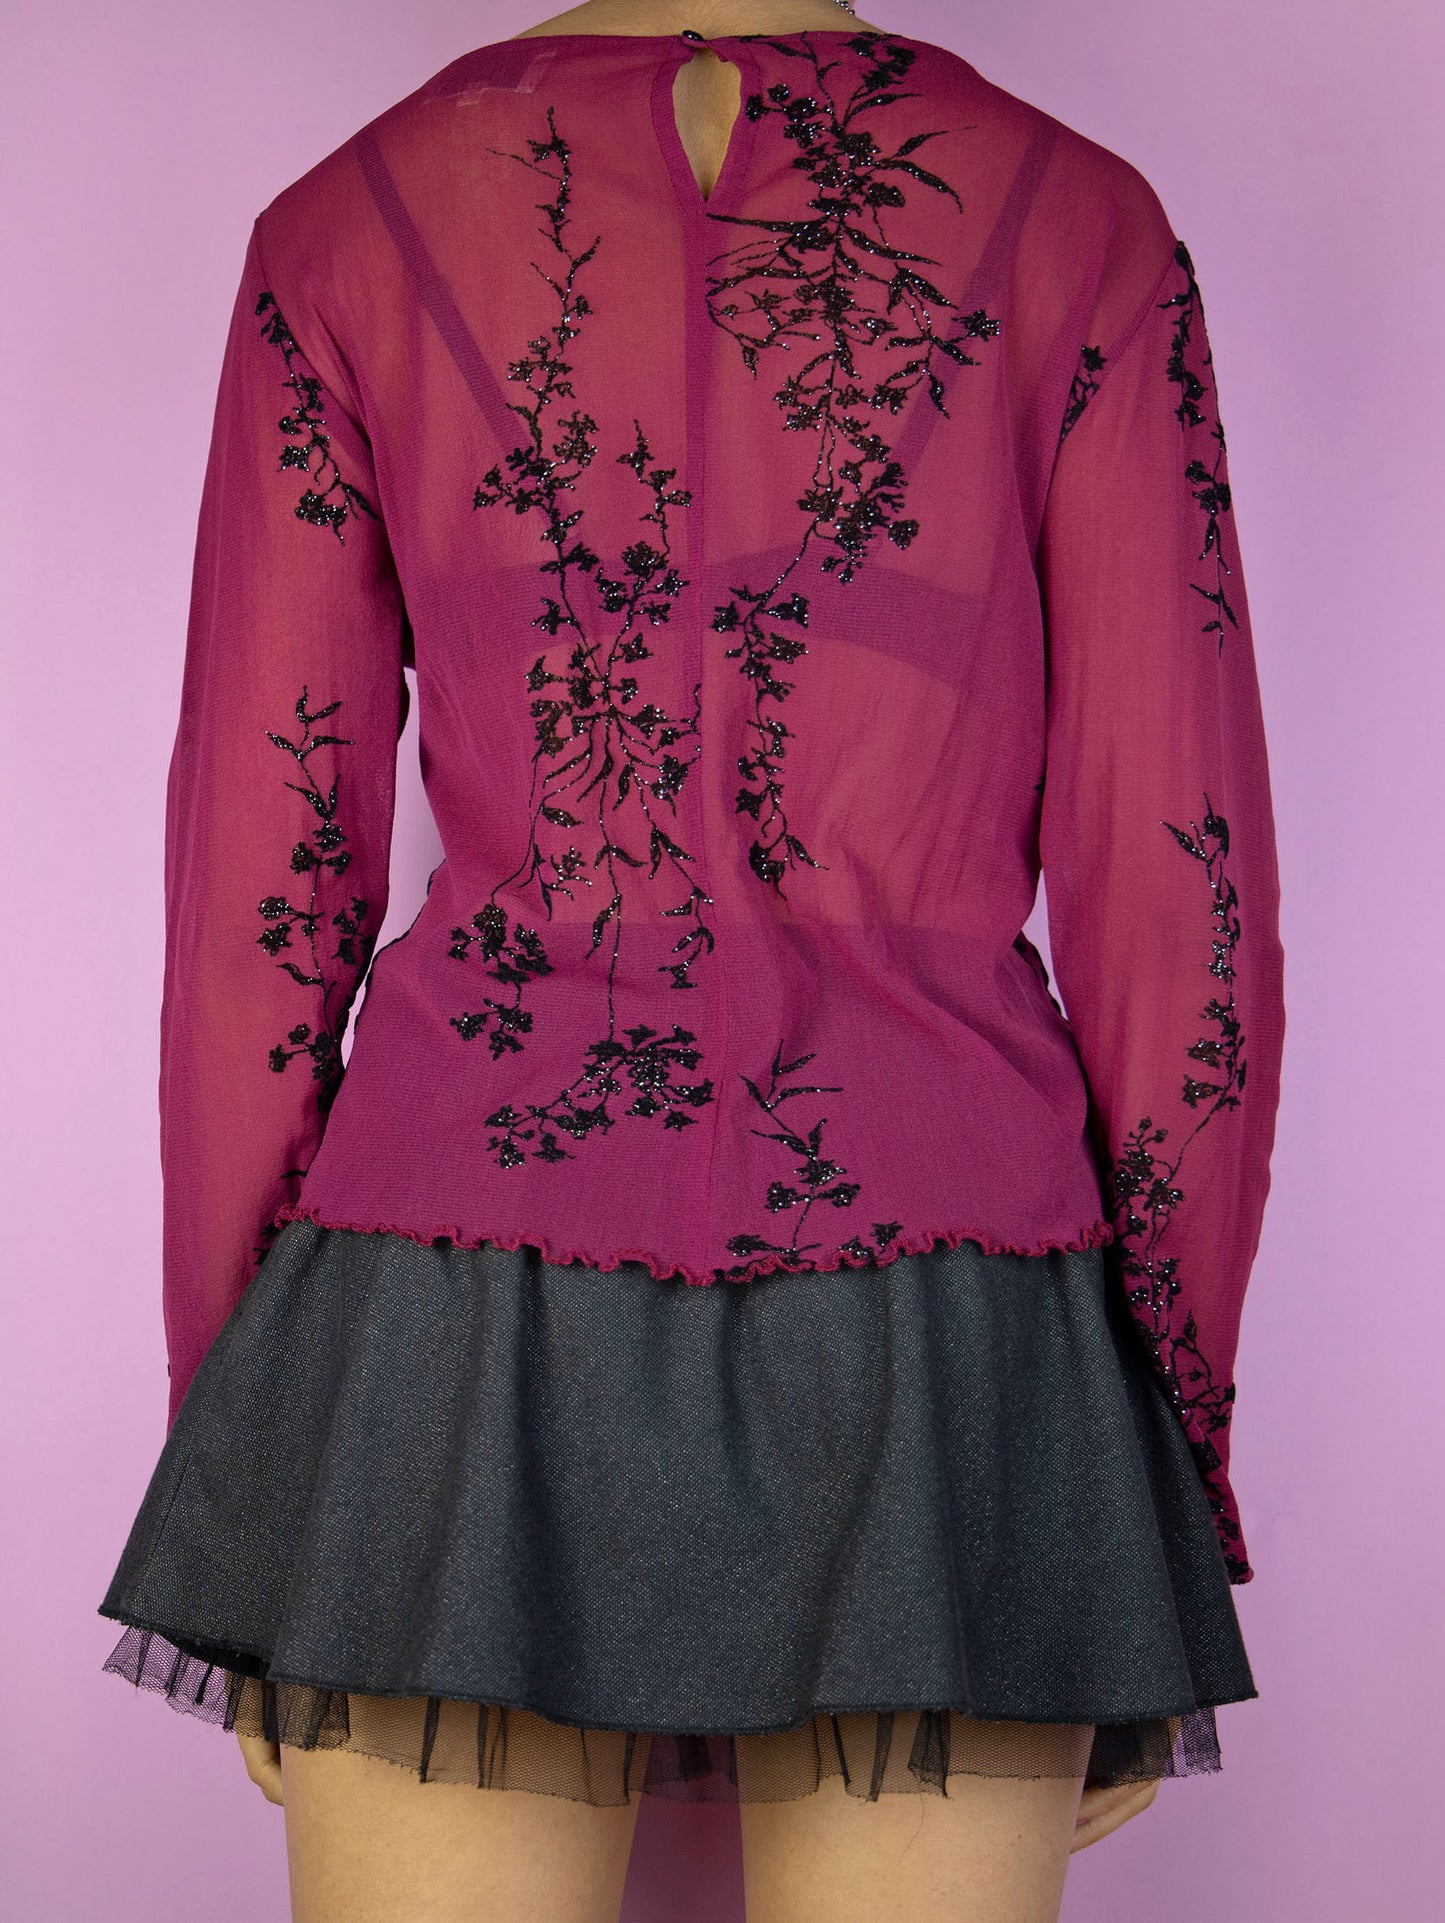 The Vintage 90s Maroon Mesh Top is an elegant dark romantic fairy inspired burgundy red long sleeve semi-sheer top with black sparkle floral details, back button closure and lettuce hem.